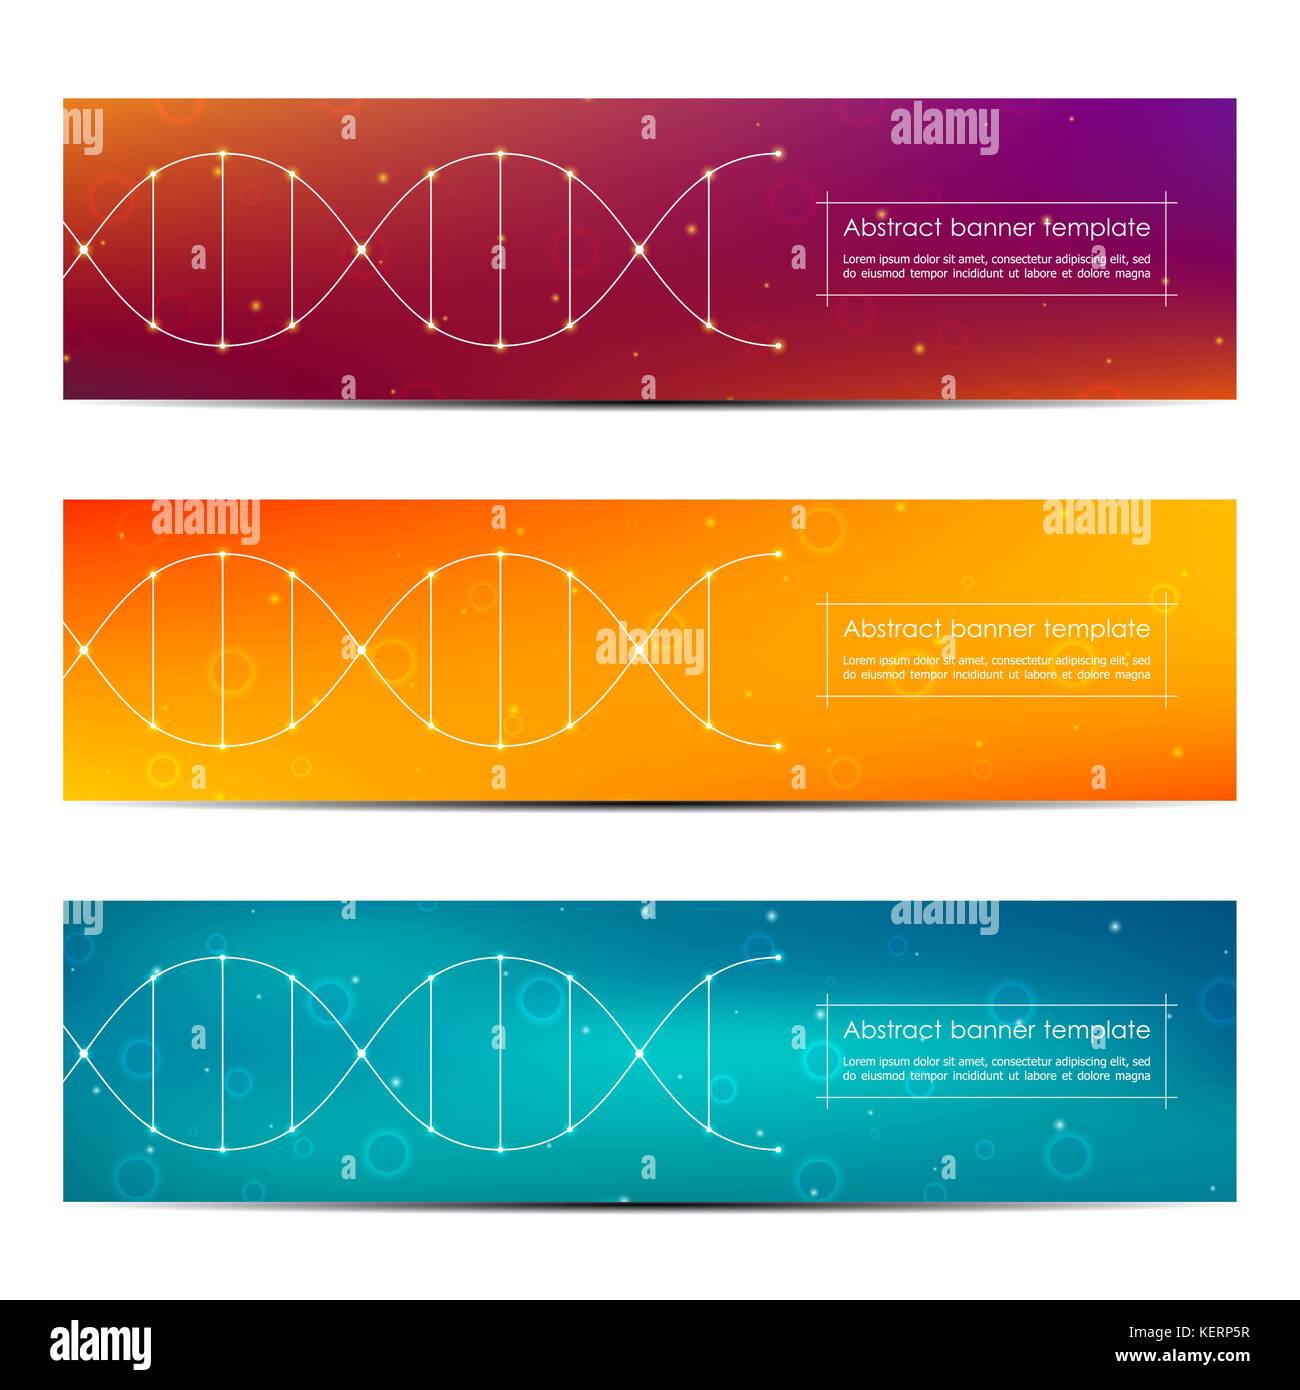 Abstract banner design, dna molecule structure background, vector illustration Stock Vector